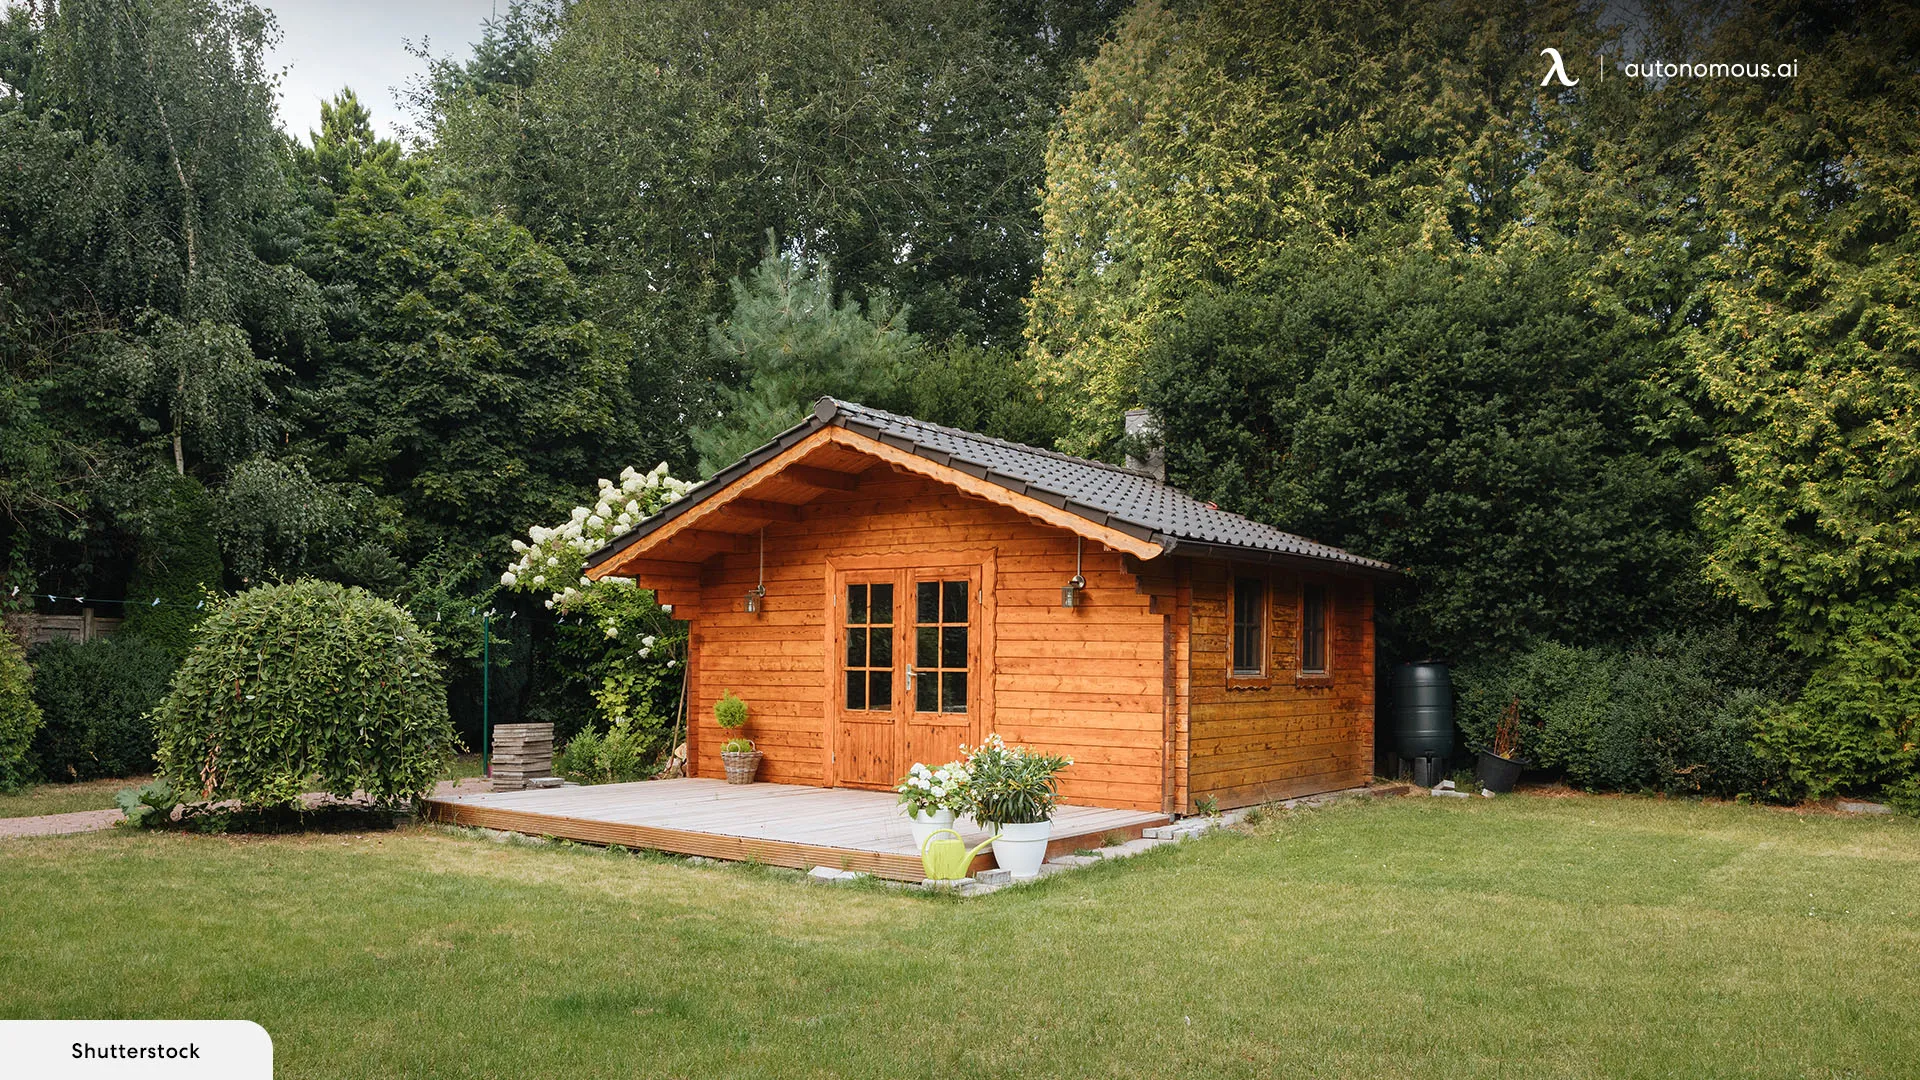 Additional Tips for Shed Landscaping